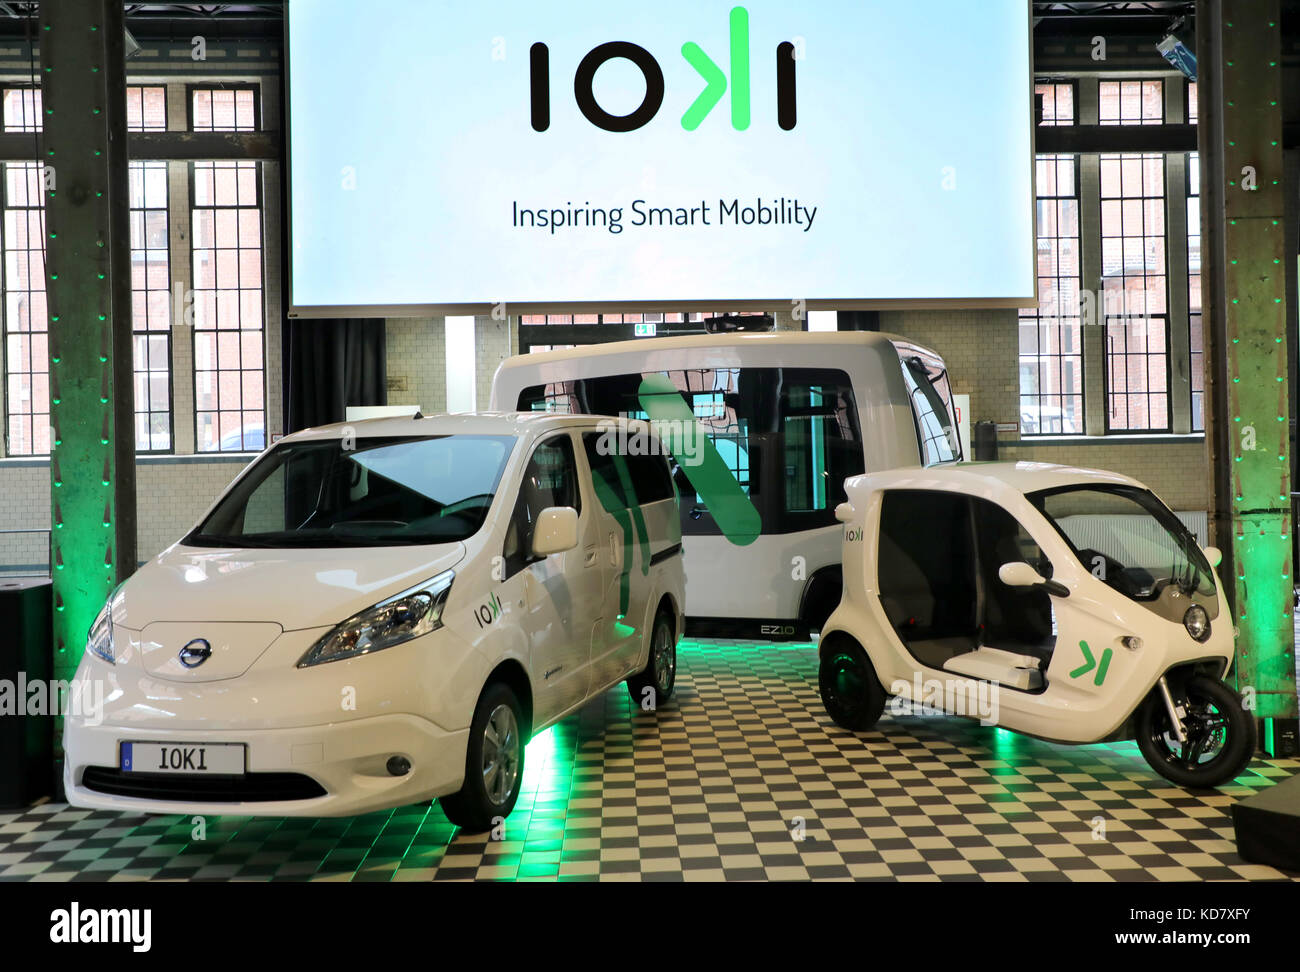 Berlin, Germany. 11th Oct, 2017. At a press meeting 'Mobil auf einen Klick - DB bringt On-Demand-Mobilität und autonomes Fahren in den öffentlichen Verkehr' (lit. 'Mobility with one click - German Railways offers On Demand Mobility in public transport') new electronic vehicles are presented in Berlin, Germany, 11 October 2017. From Left to Right: Nissan NV200, Easymile Shuttle and Cleanmotion ZBEE. Credit: Wolfgang Kumm/dpa/Alamy Live News Stock Photo